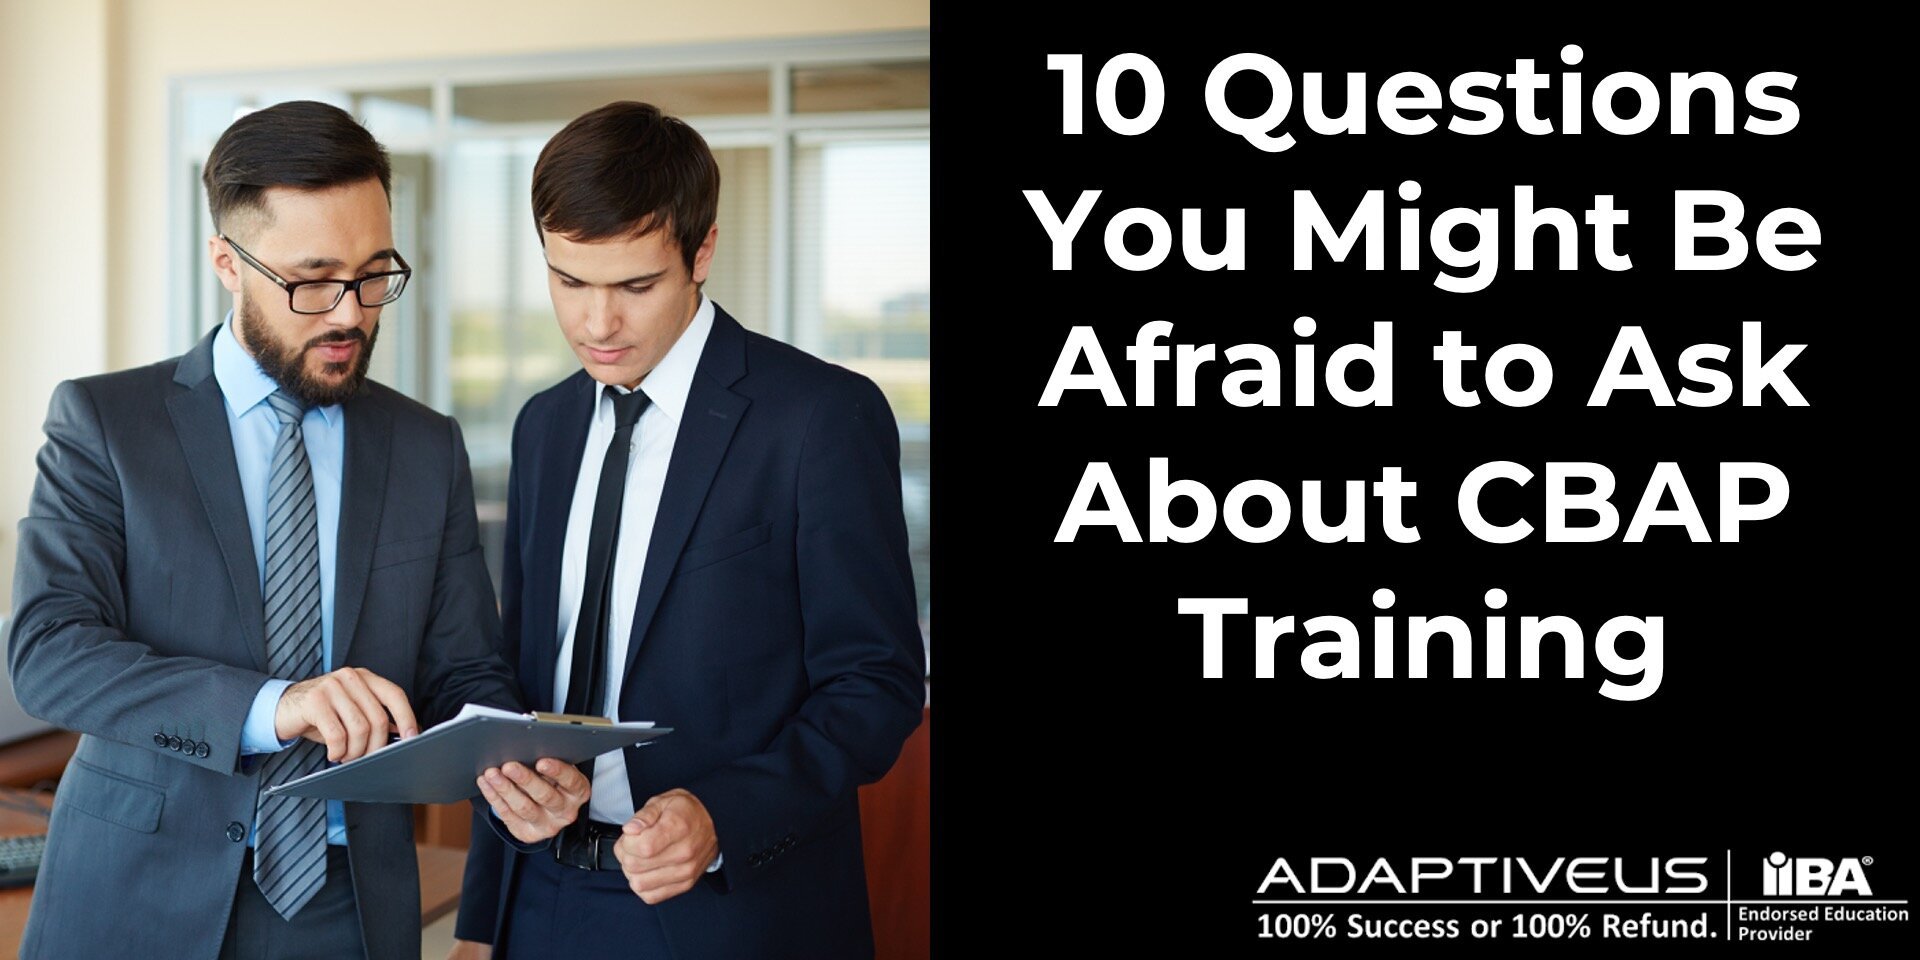 10 Questions You Might Be Afraid to Ask About CBAP Training